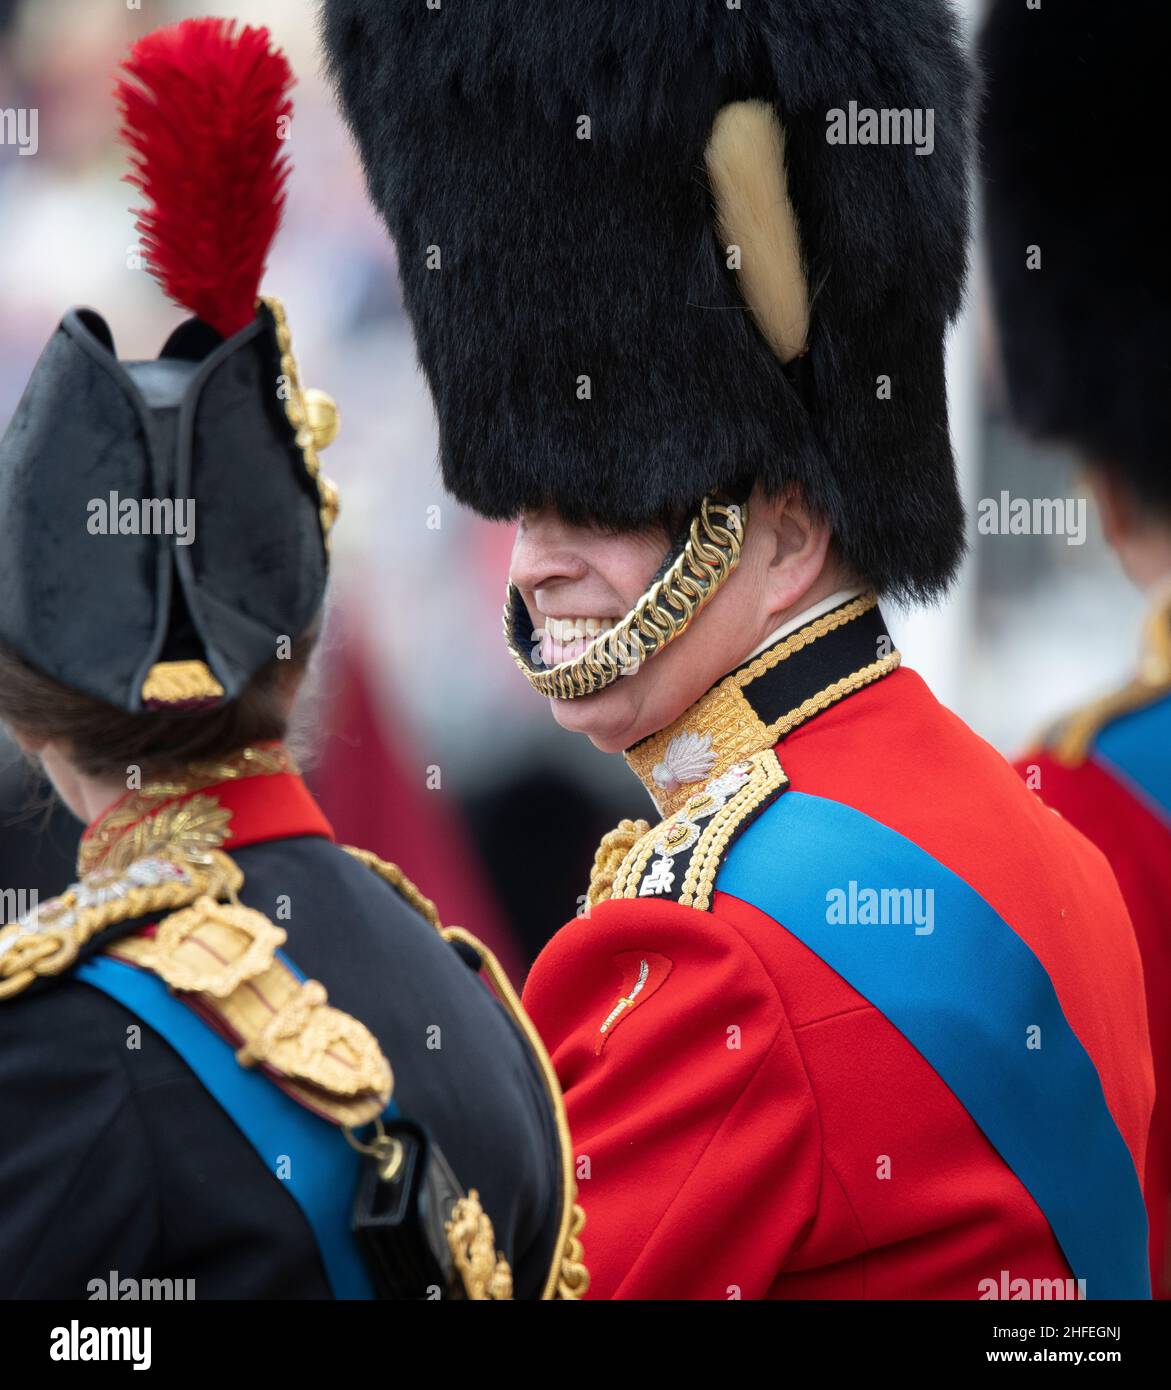 Horse Guards Parade, London, UK. 8 June 2019. Prince Andrew, Duke of York, wearing Colonel in Chief Grenadier Guards uniform, attends the  Queens Birthday Parade 2019, or Trooping the Colour. Seen here taking to The Princess Royal and smiling. Credit: Malcolm Park/Alamy Stock Photo